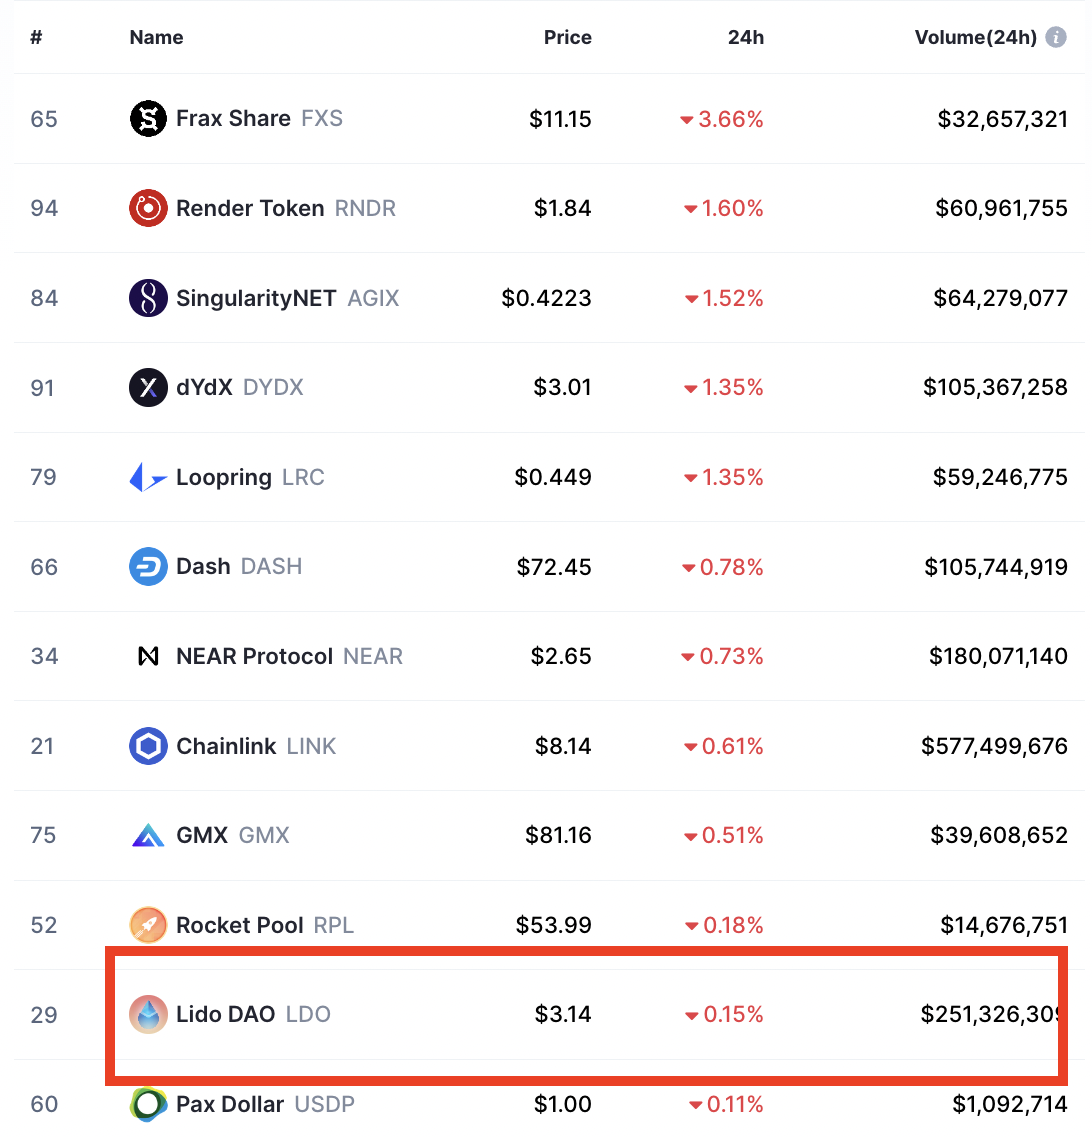 Top Crypto Losers Today